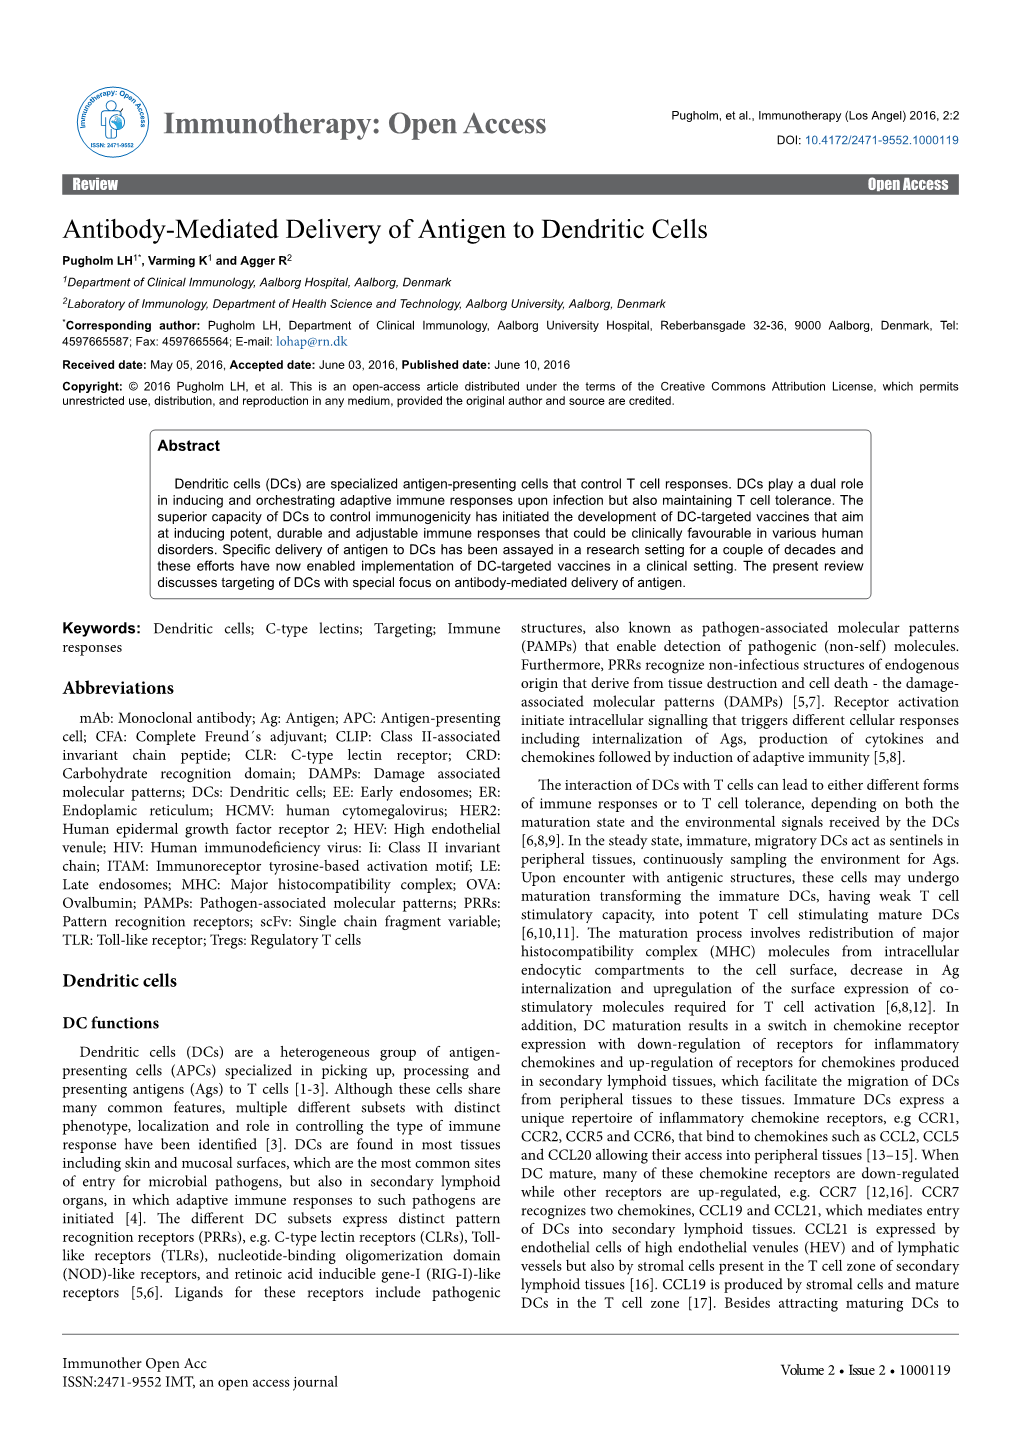 Antibody-Mediated Delivery of Antigen to Dendritic Cells